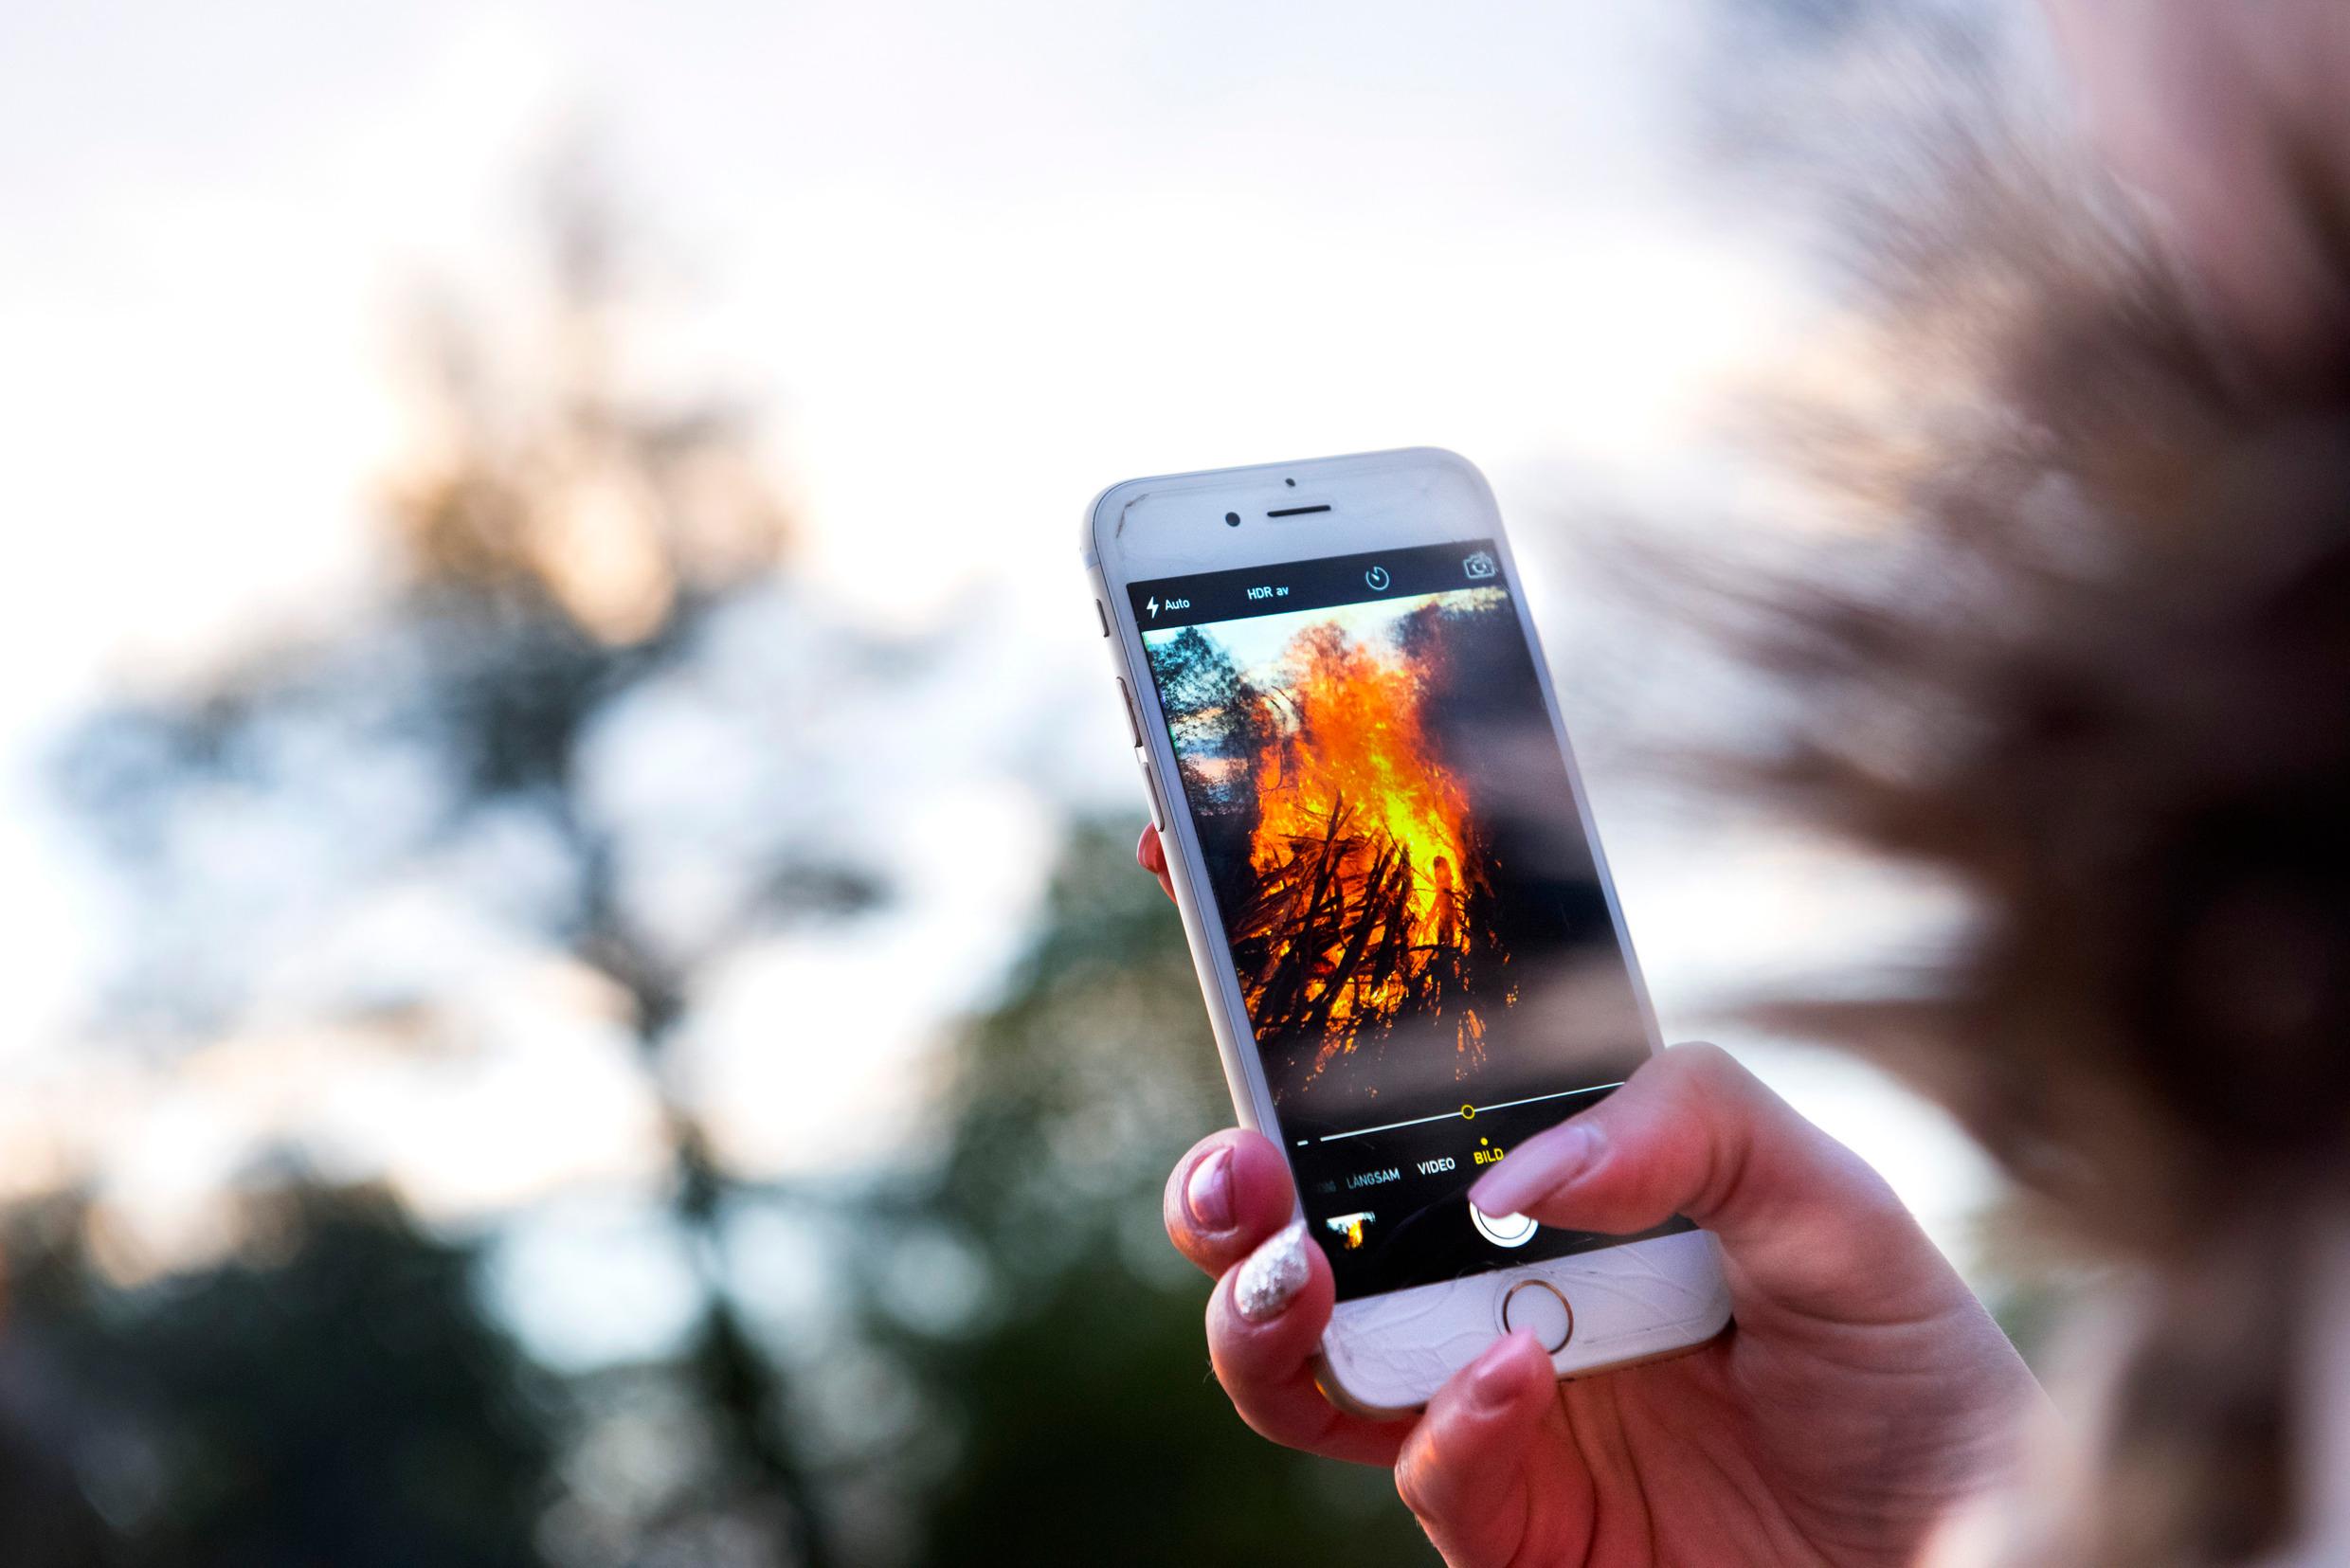 A hand holding a phone with a Walpurgis bonfire showing on the screen.